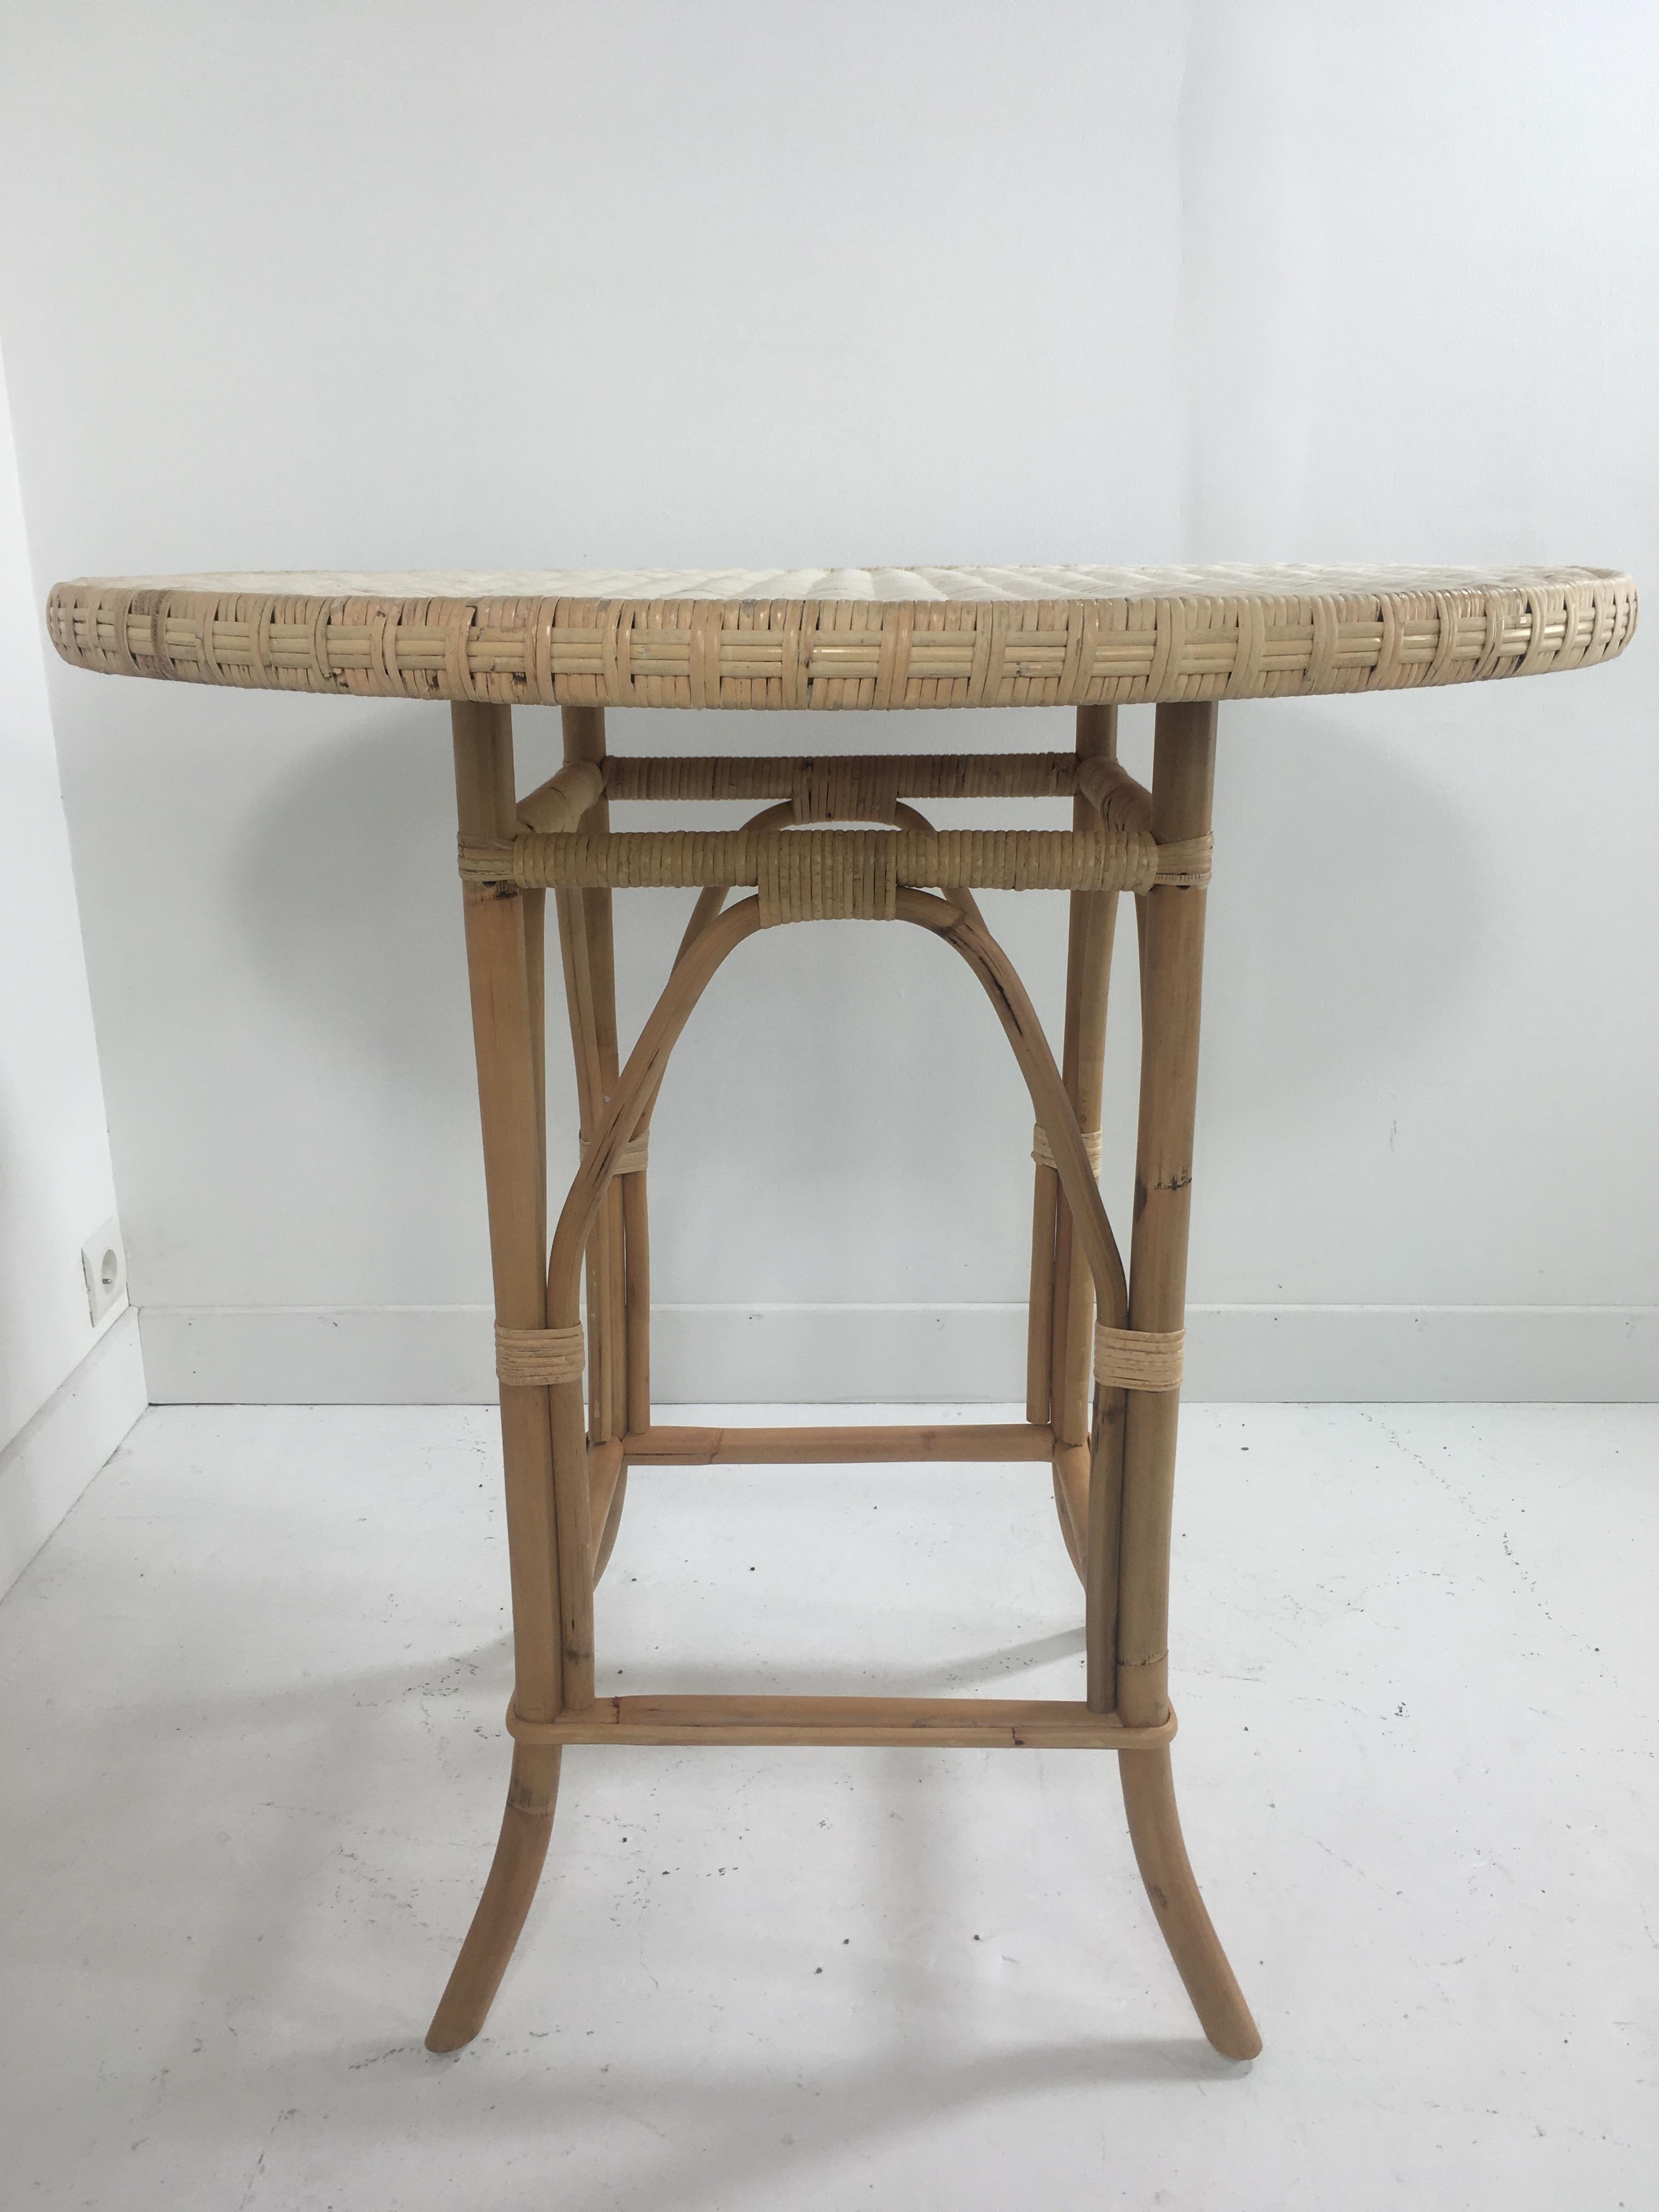 Contemporary French 1900s Design Bistro Round Pedestal Table in Rattan and Wicker Cane For Sale